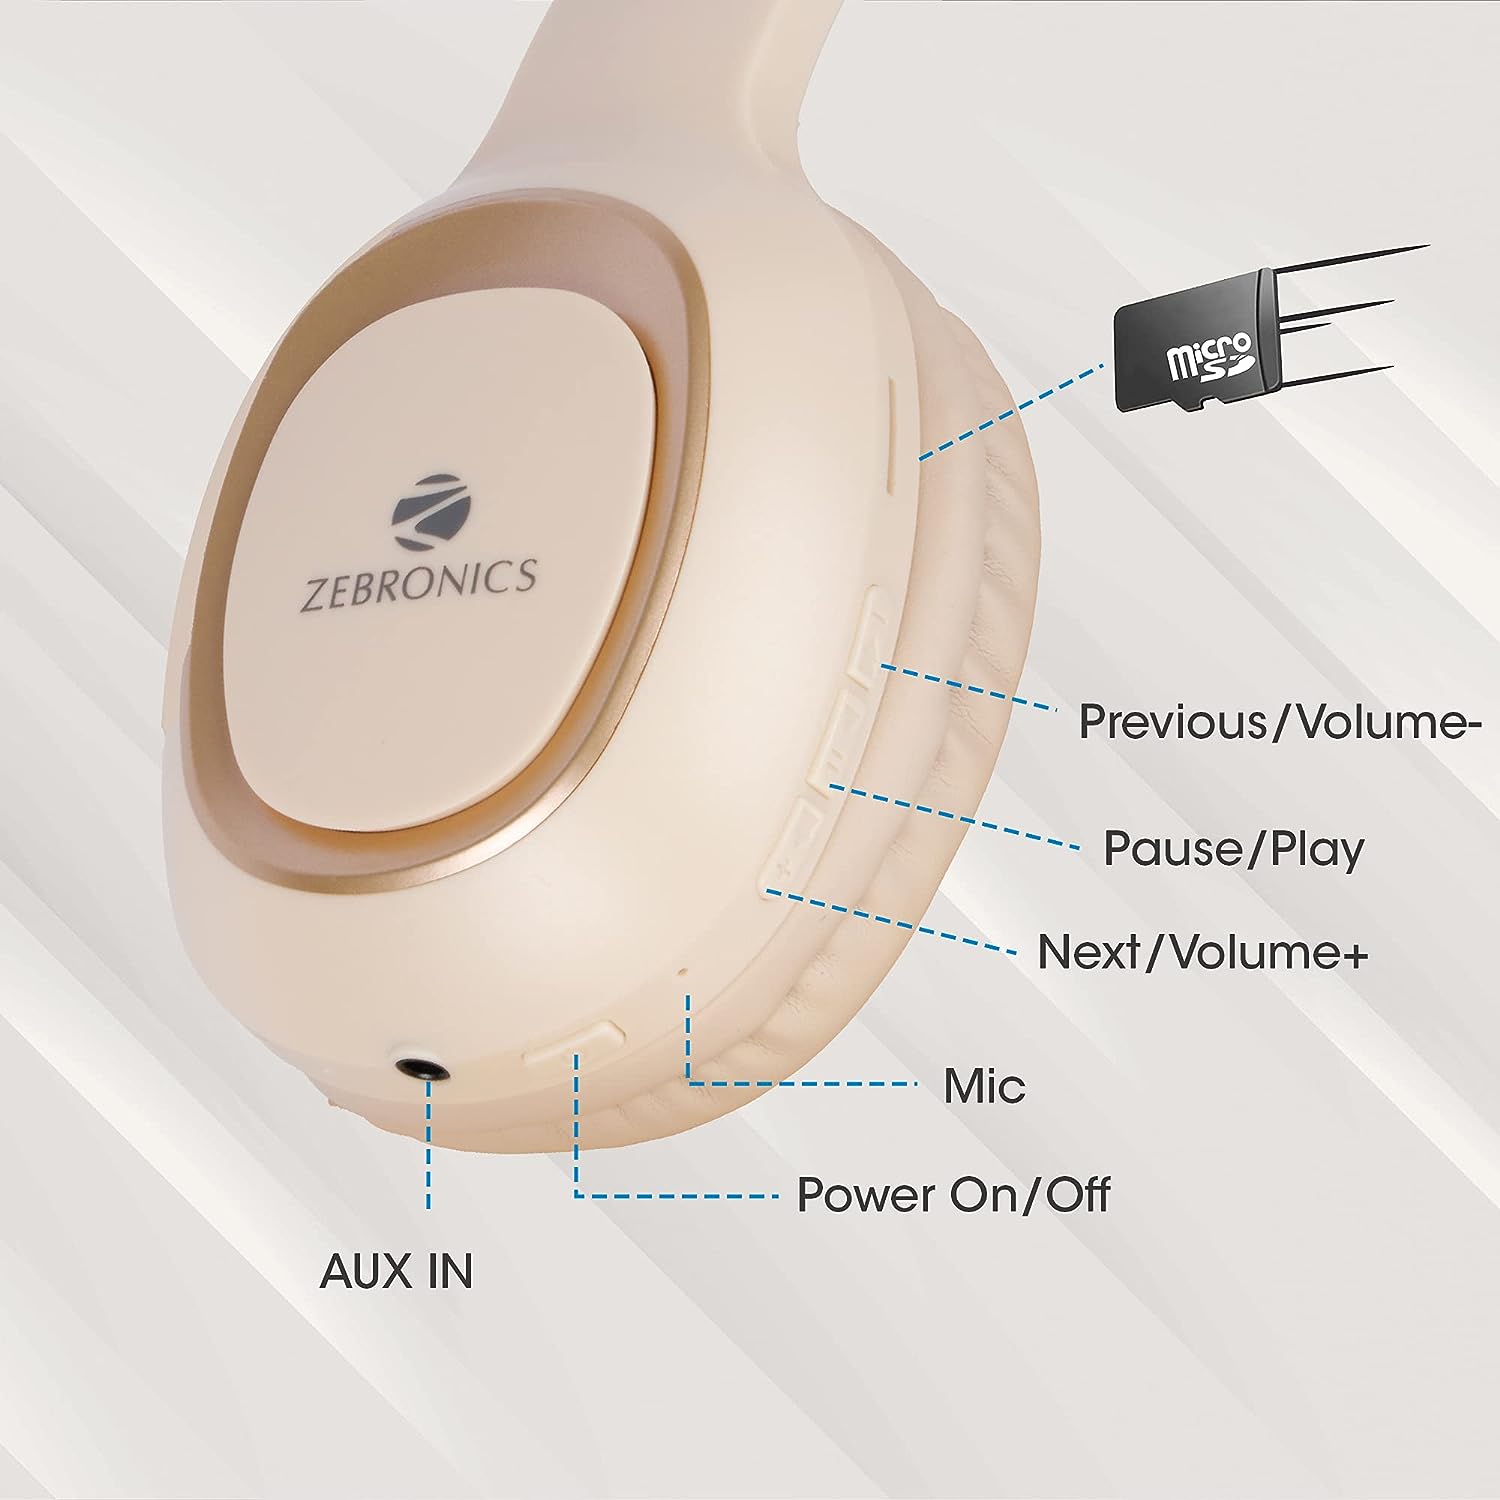 Zebronics Zeb - Paradise (Beige) Bluetooth Wireless On Ear Headphones With Mic Comes With 40Mm Drivers, Aux Connectivity, Built In Fm, Call Function, 15Hrs* Playback Time And Supports Micro Sd Card